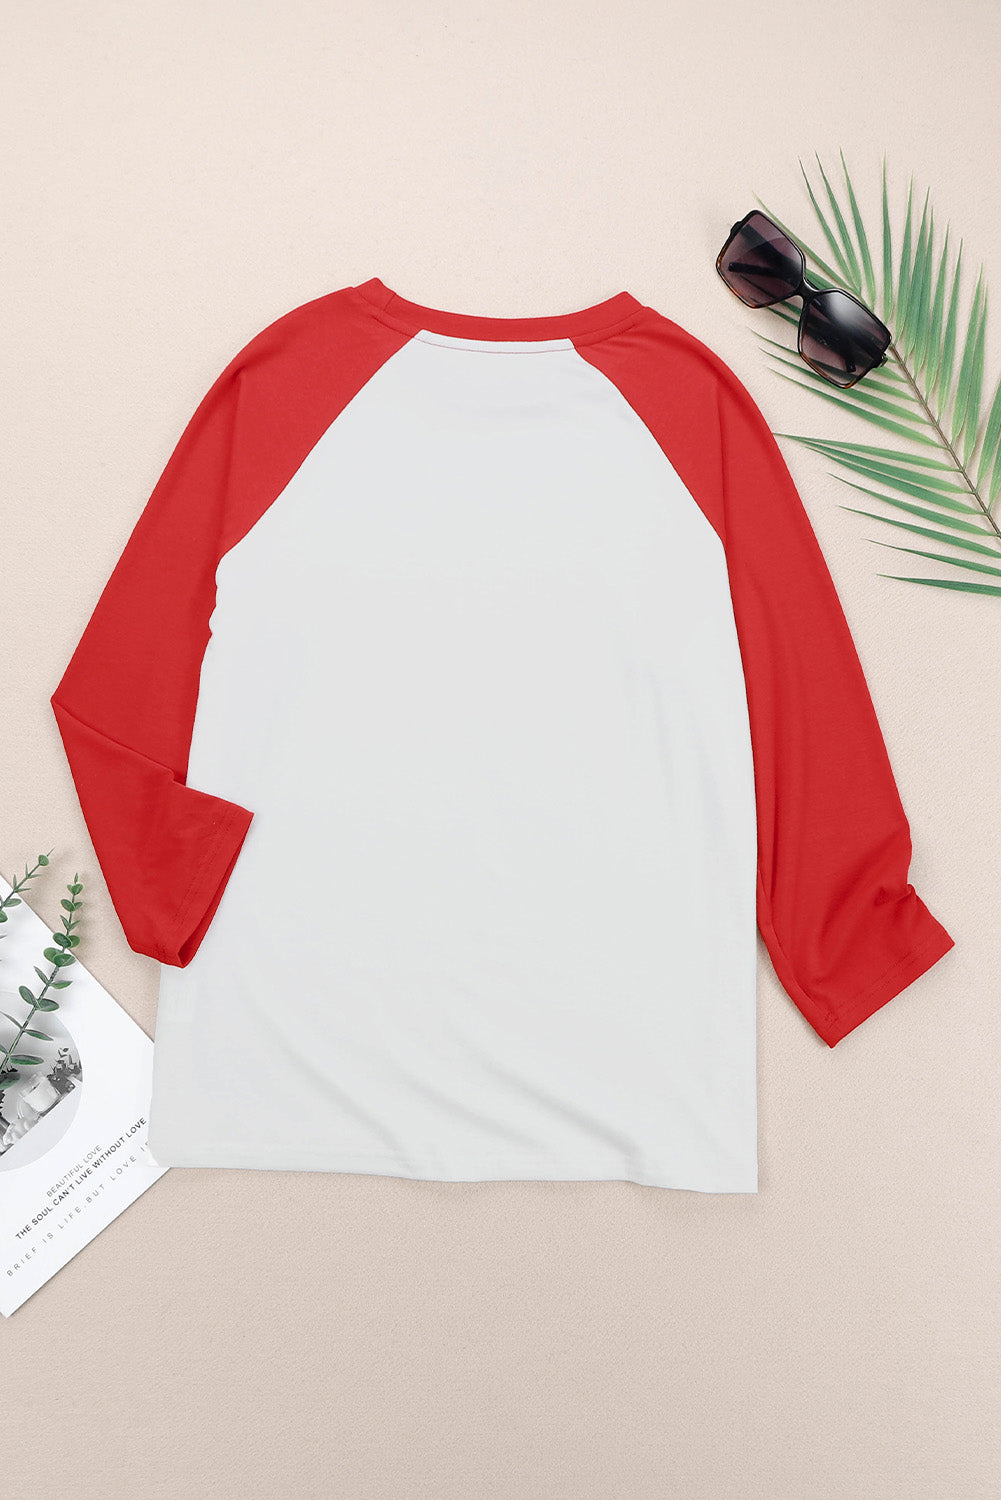 Simply Love PARTY IN THE USA Graphic Raglan Sleeve Tee